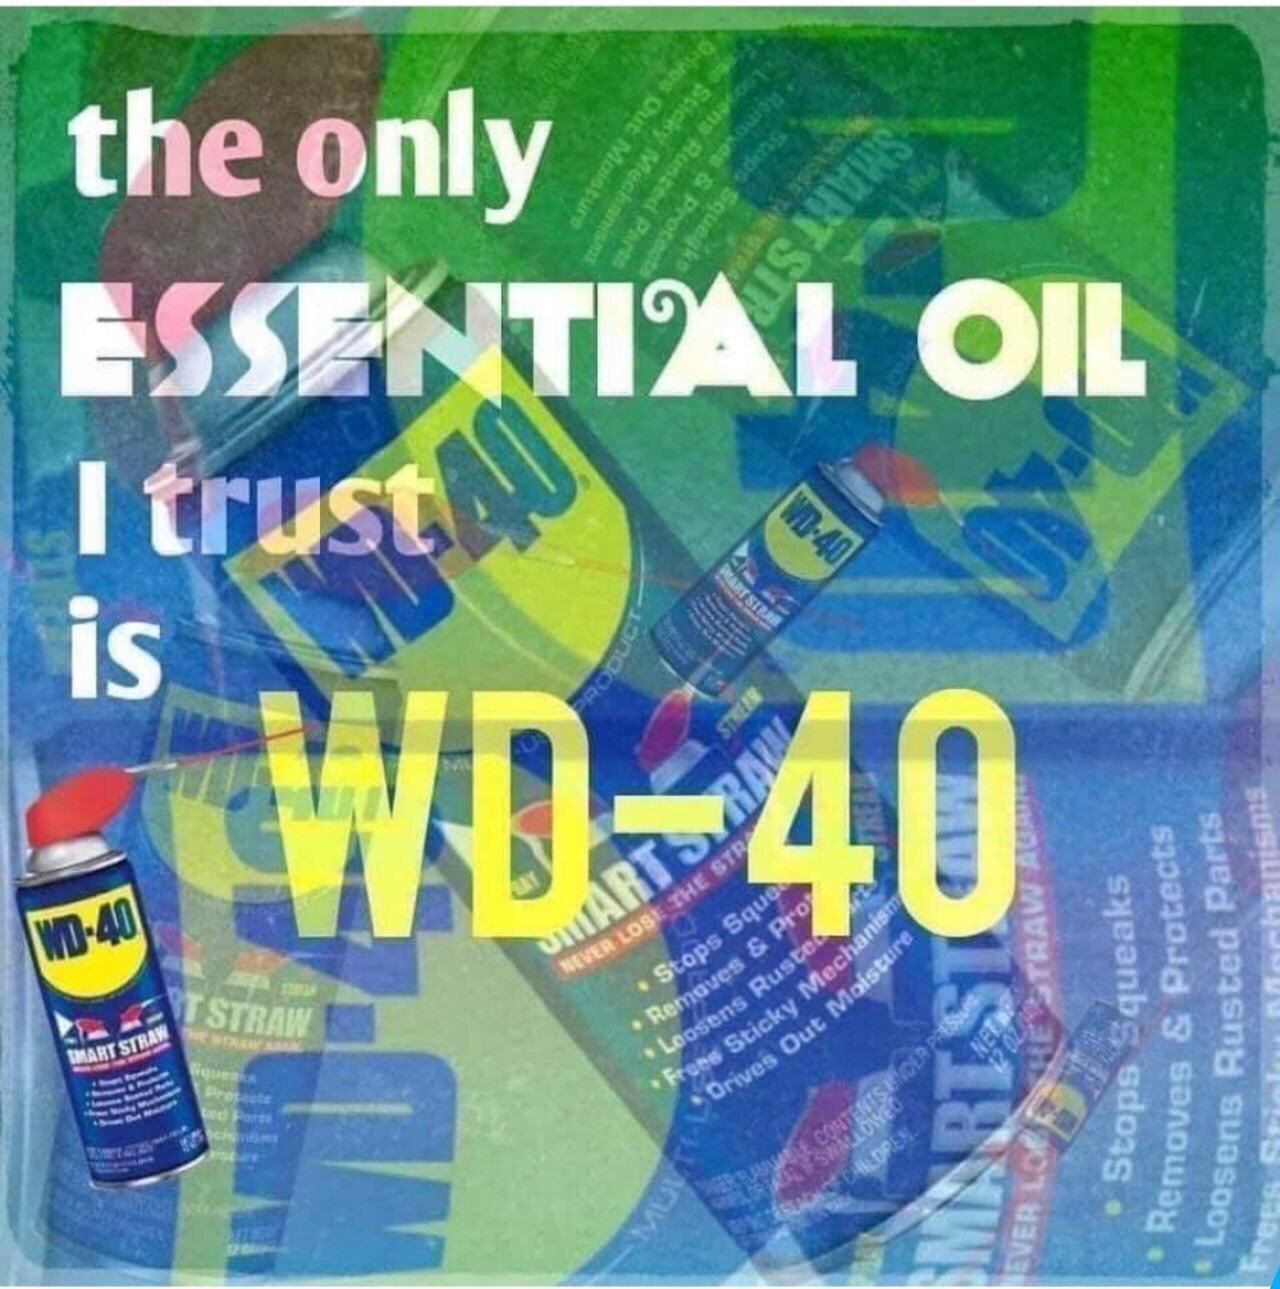 dank memes - funny memes - wd 40 is the only essential oil - us Due Moon Senos Suesk honapon Smart Sie the only Essential Oil I trust is A A Bart Stras 13na Susilie Wd40 Umarts Ral Never Lose The St tops T Straw lo ves Hestraw A 1151 ns Ry Stops Squeaks R